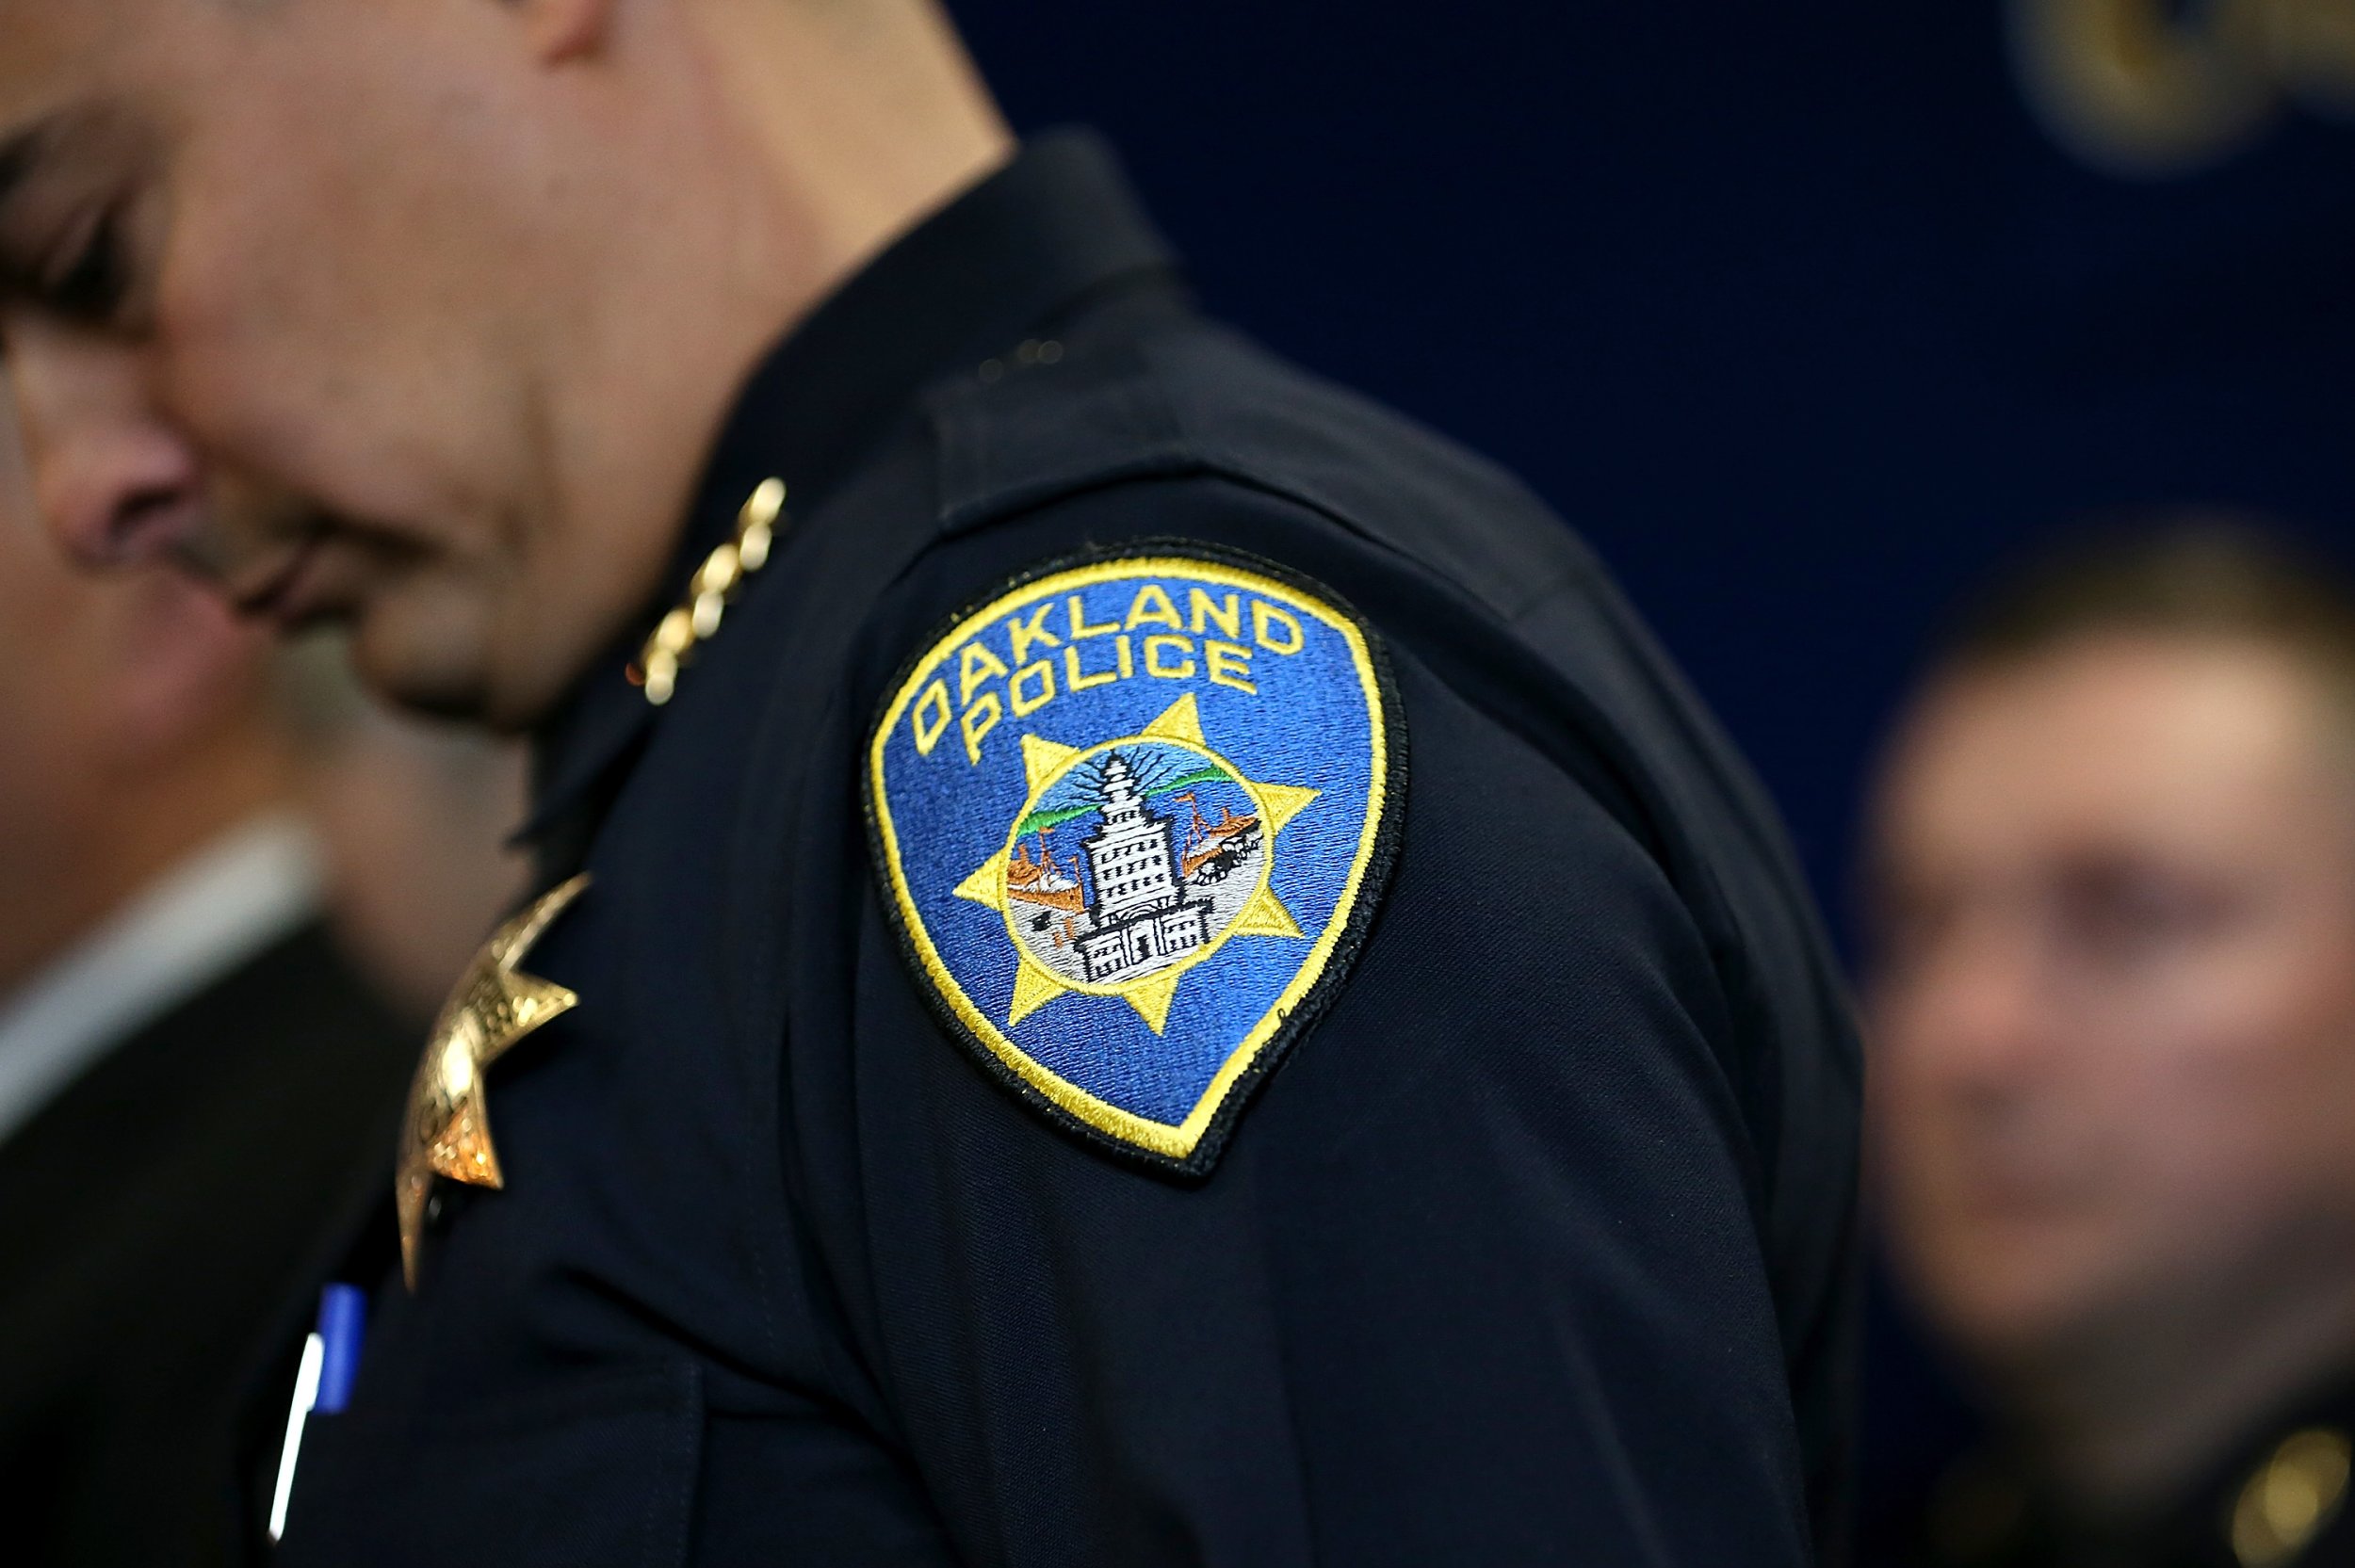 Teenage Former Sex Worker From Virginia Awarded Nearly 1 Million To Settle Oakland Police Sex